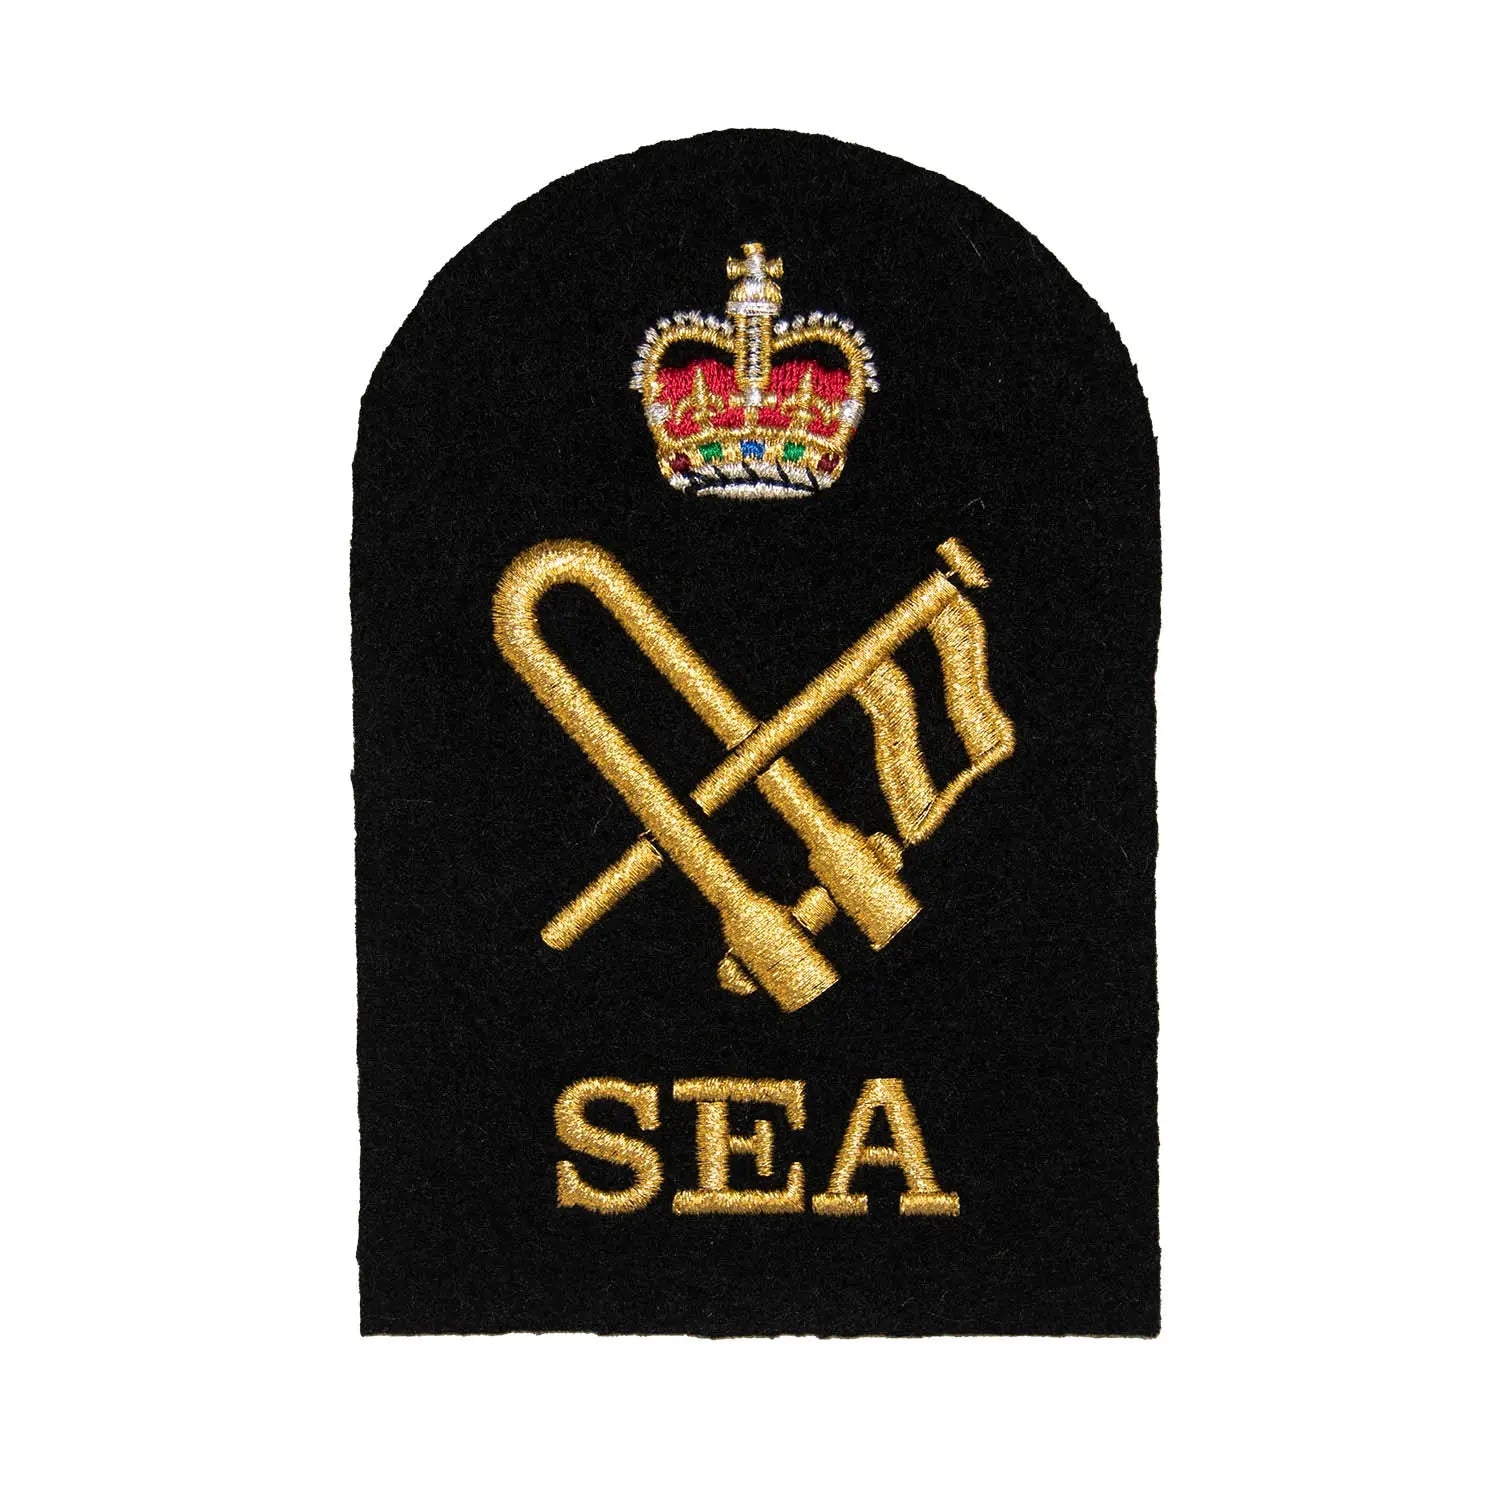 Seaman Specialist Petty Officer Royal Navy Qualification Badges wyedean